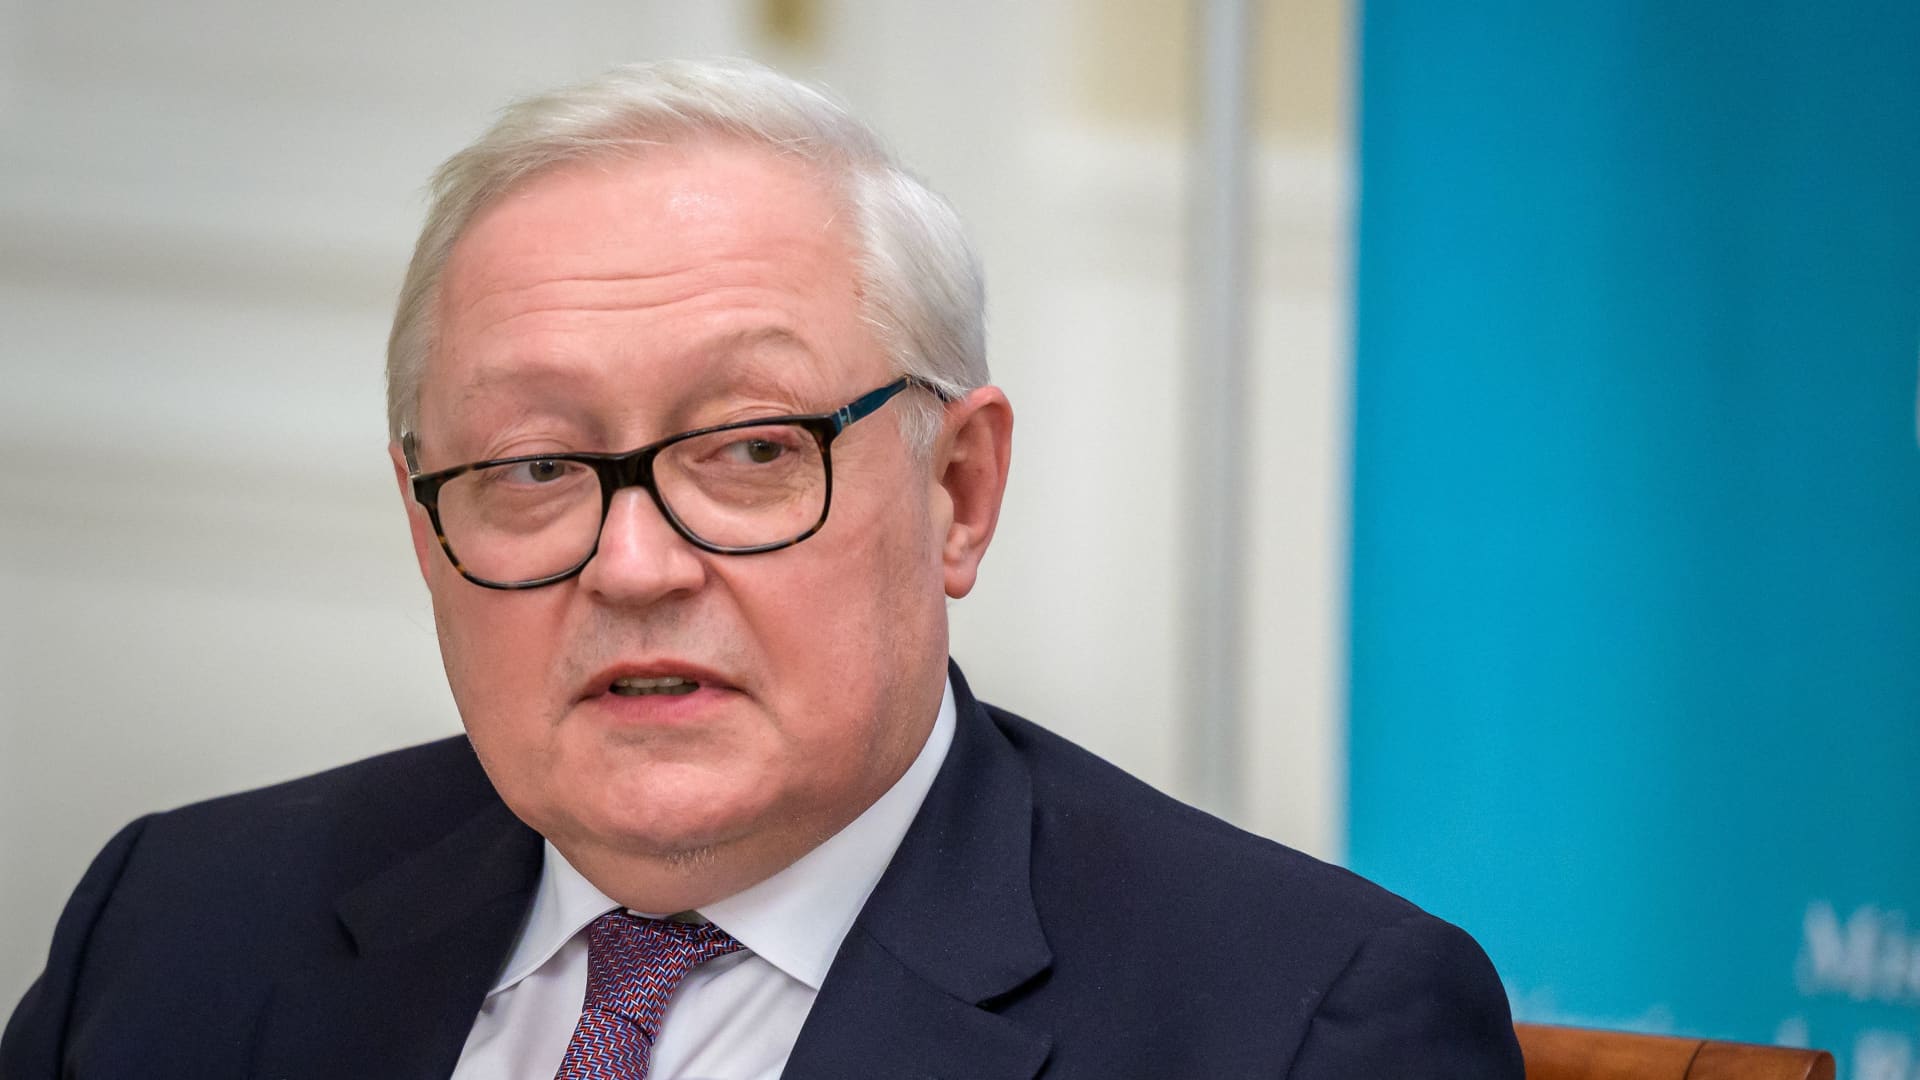 Russian Deputy Foreign Minister Sergei Ryabkov says the risk of direct clashes between Moscow and Washington have increased after the U.S. decision to supply more advanced rocket systems to Ukraine.